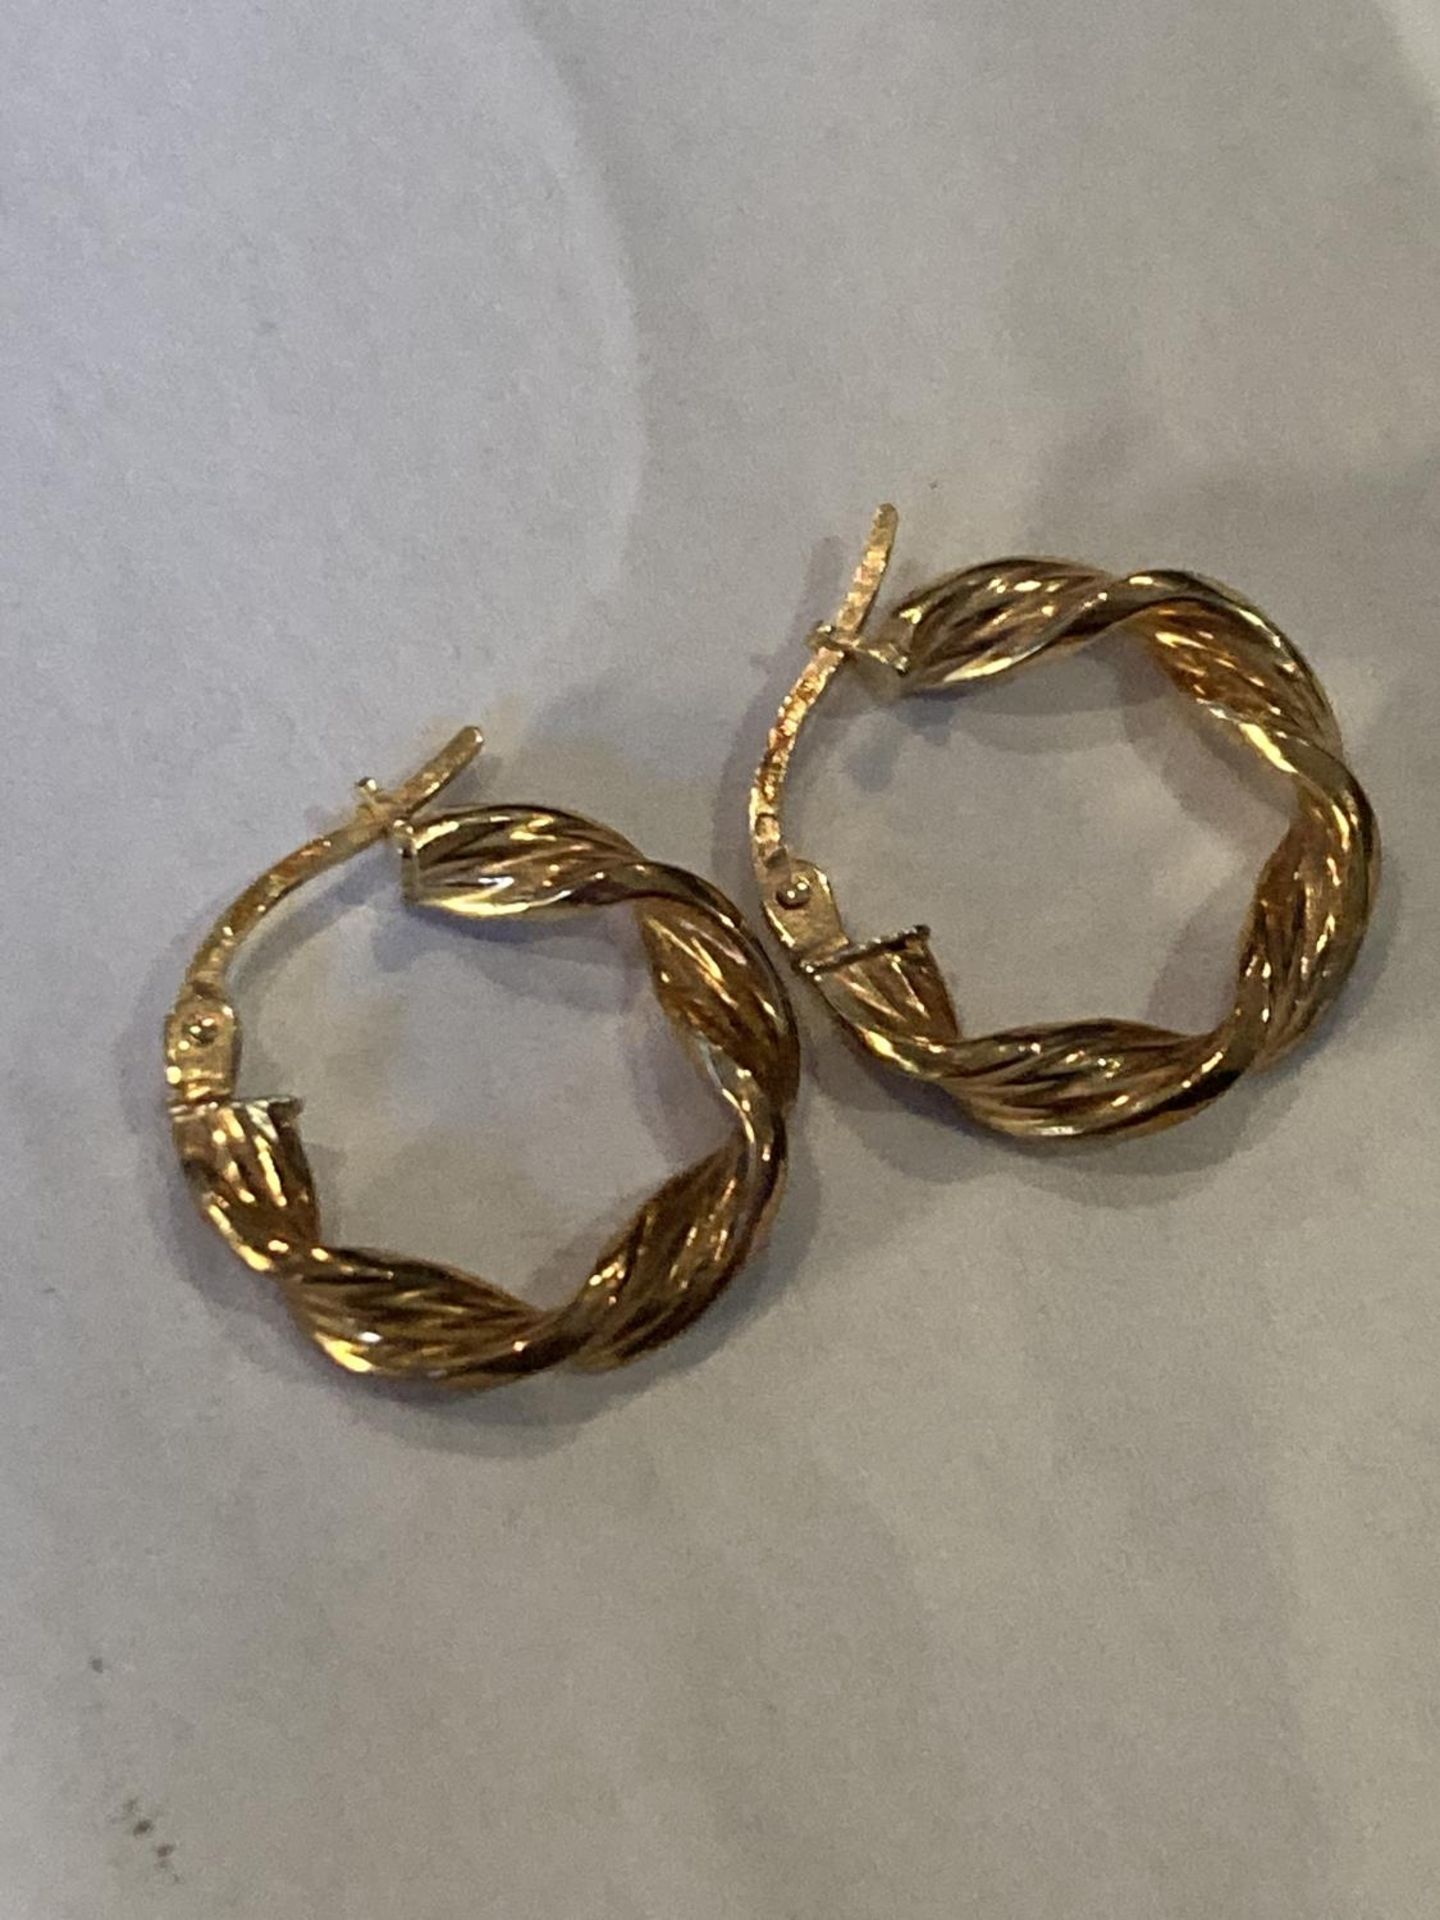 A PAIR OF 9 CARAT GOLD TWISTED HOOP EARRINGS GROSS WEIGHT 1.21 GRAMS - Image 4 of 6